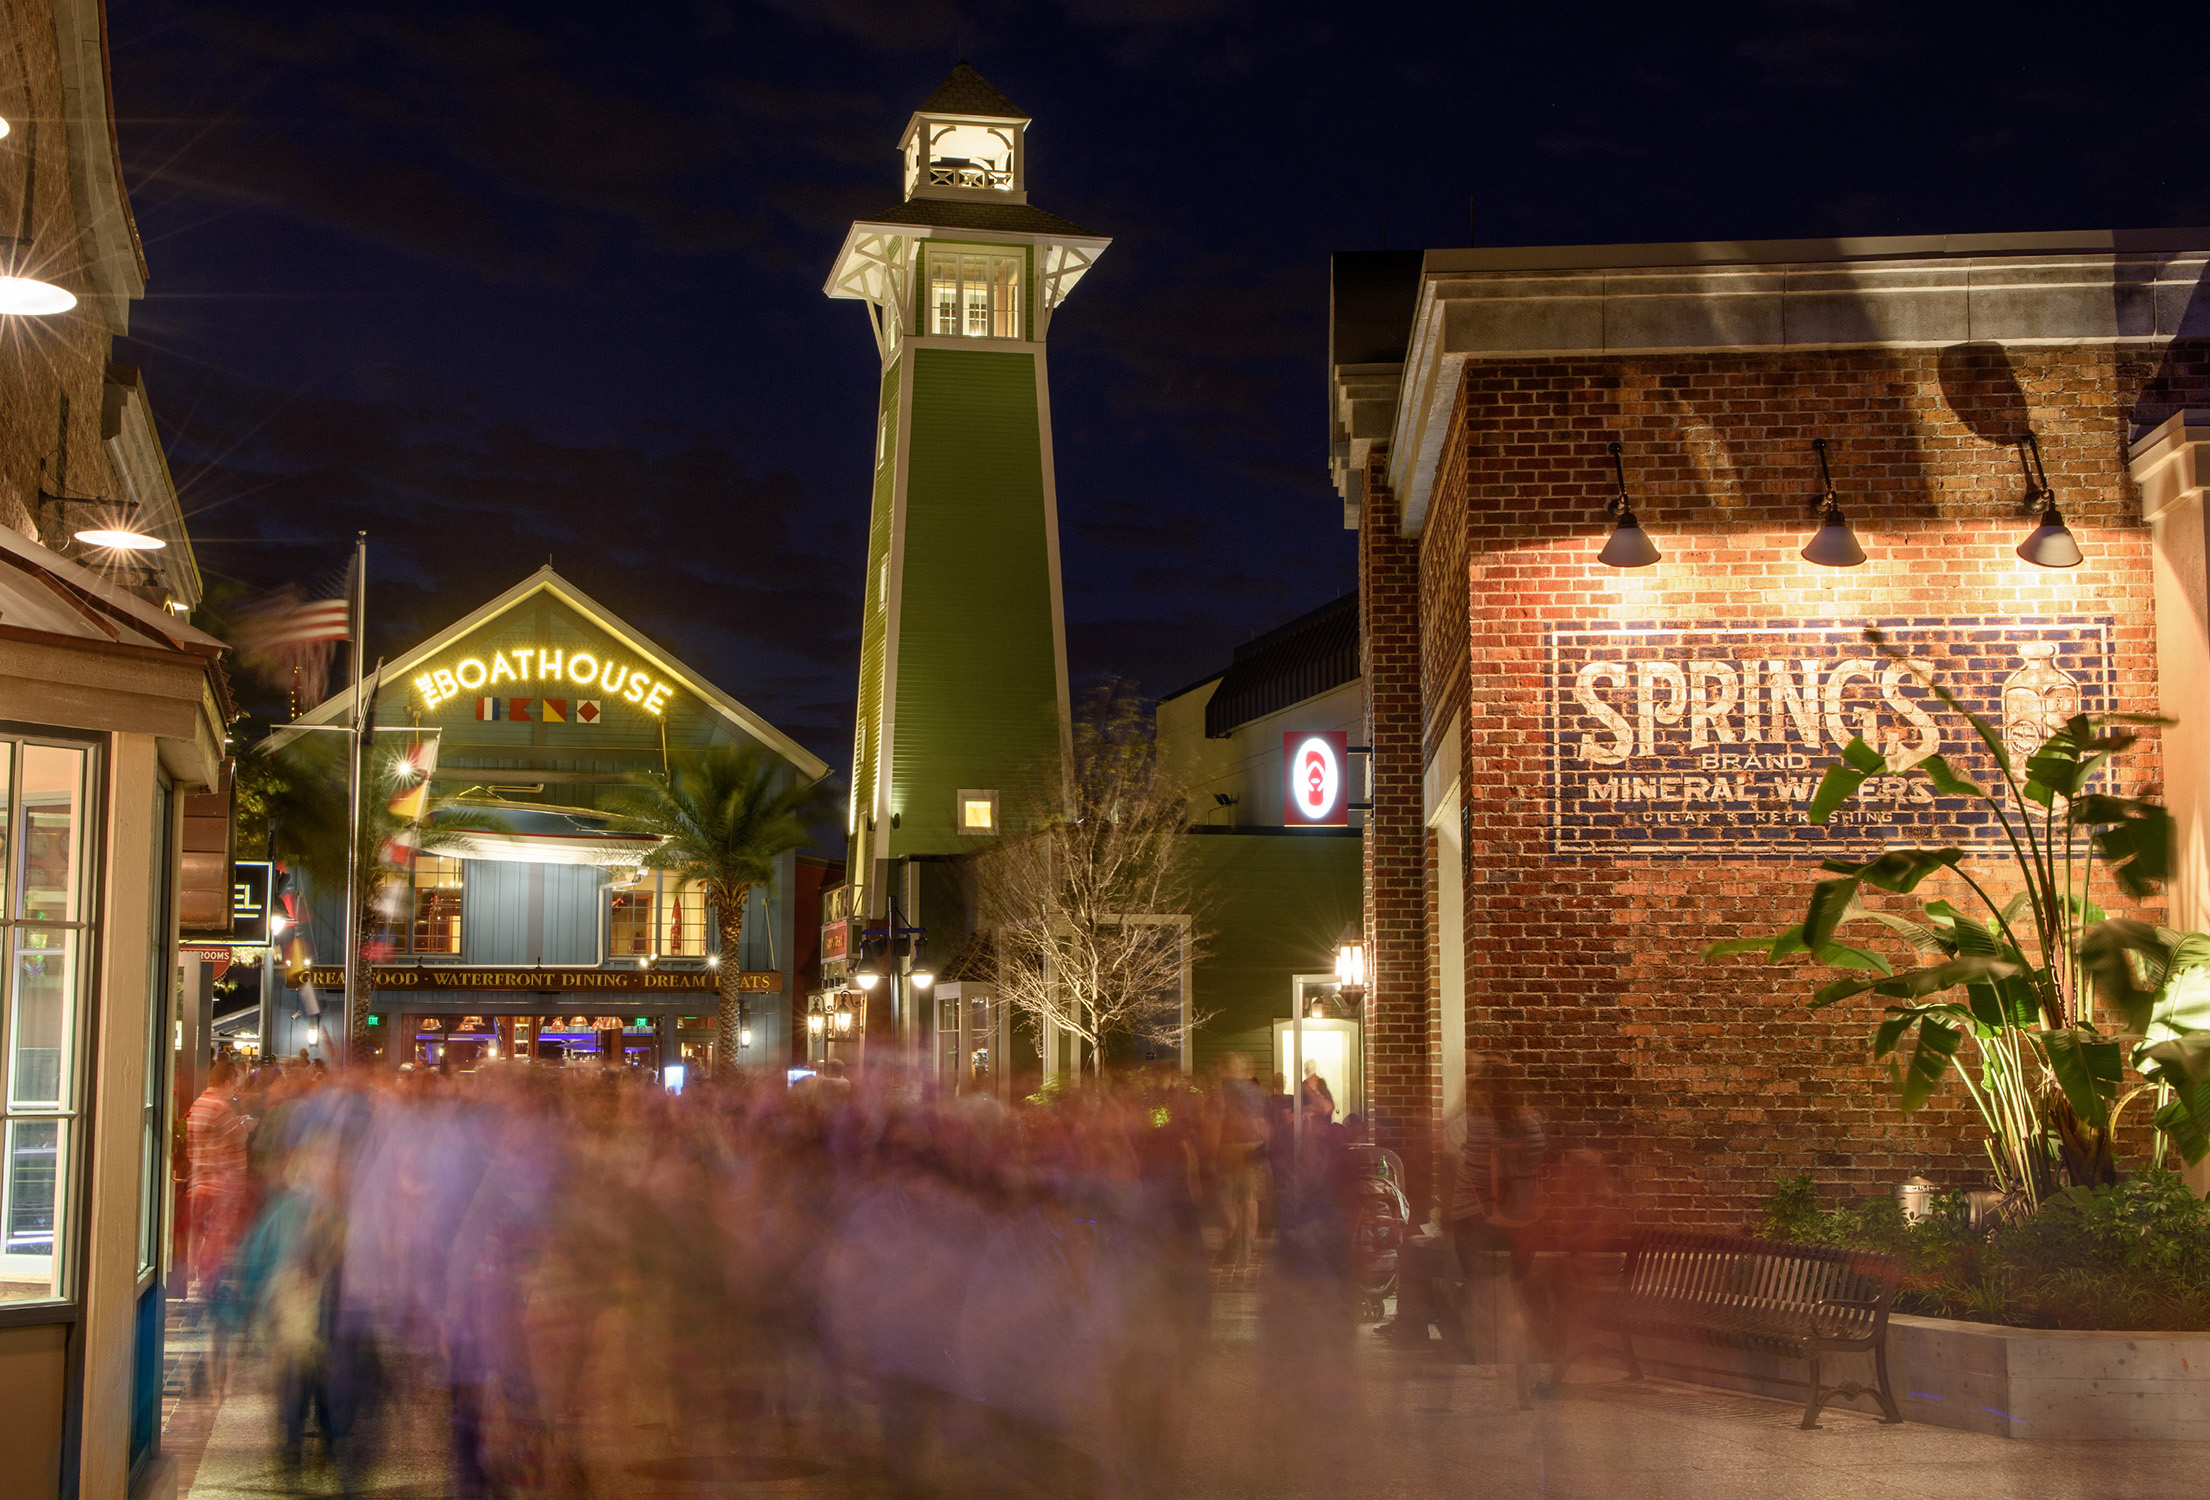 Disney Springs is home to a host of shops and eateries